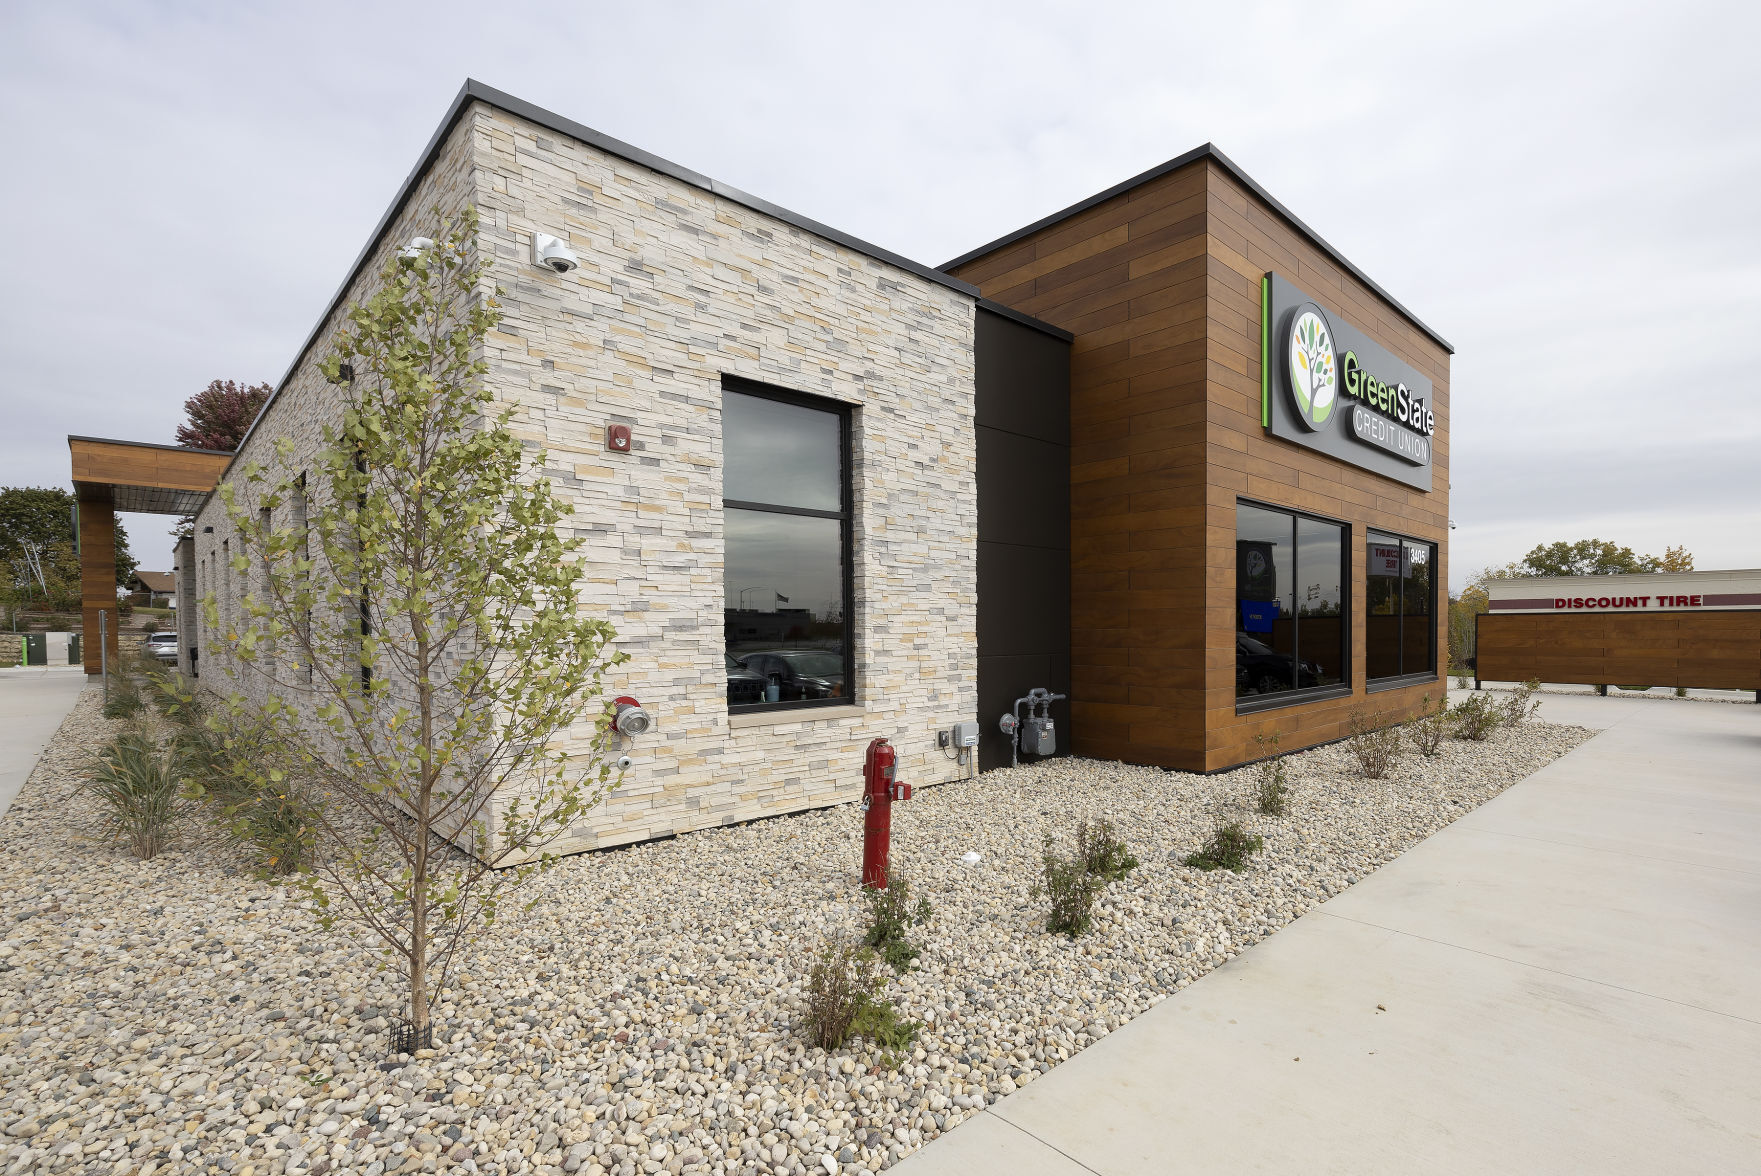 Exterior of the new GreenState Credit Union branch on Stoneman Road in Dubuque.    PHOTO CREDIT: Stephen Gassman